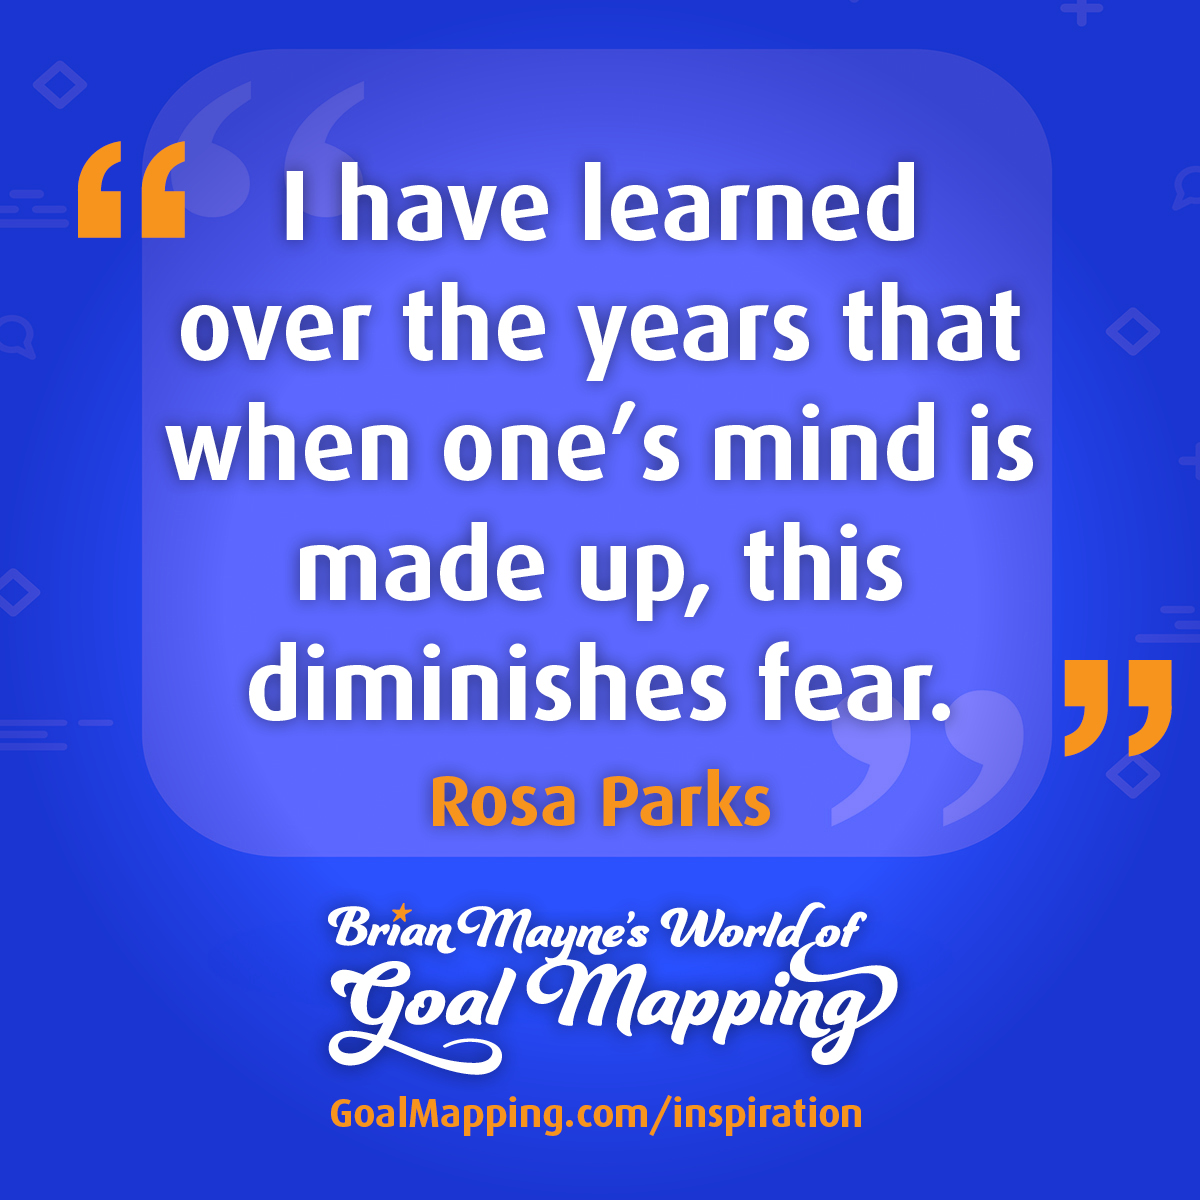 "I have learned over the years that when one’s mind is made up, this diminishes fear." Rosa Parks